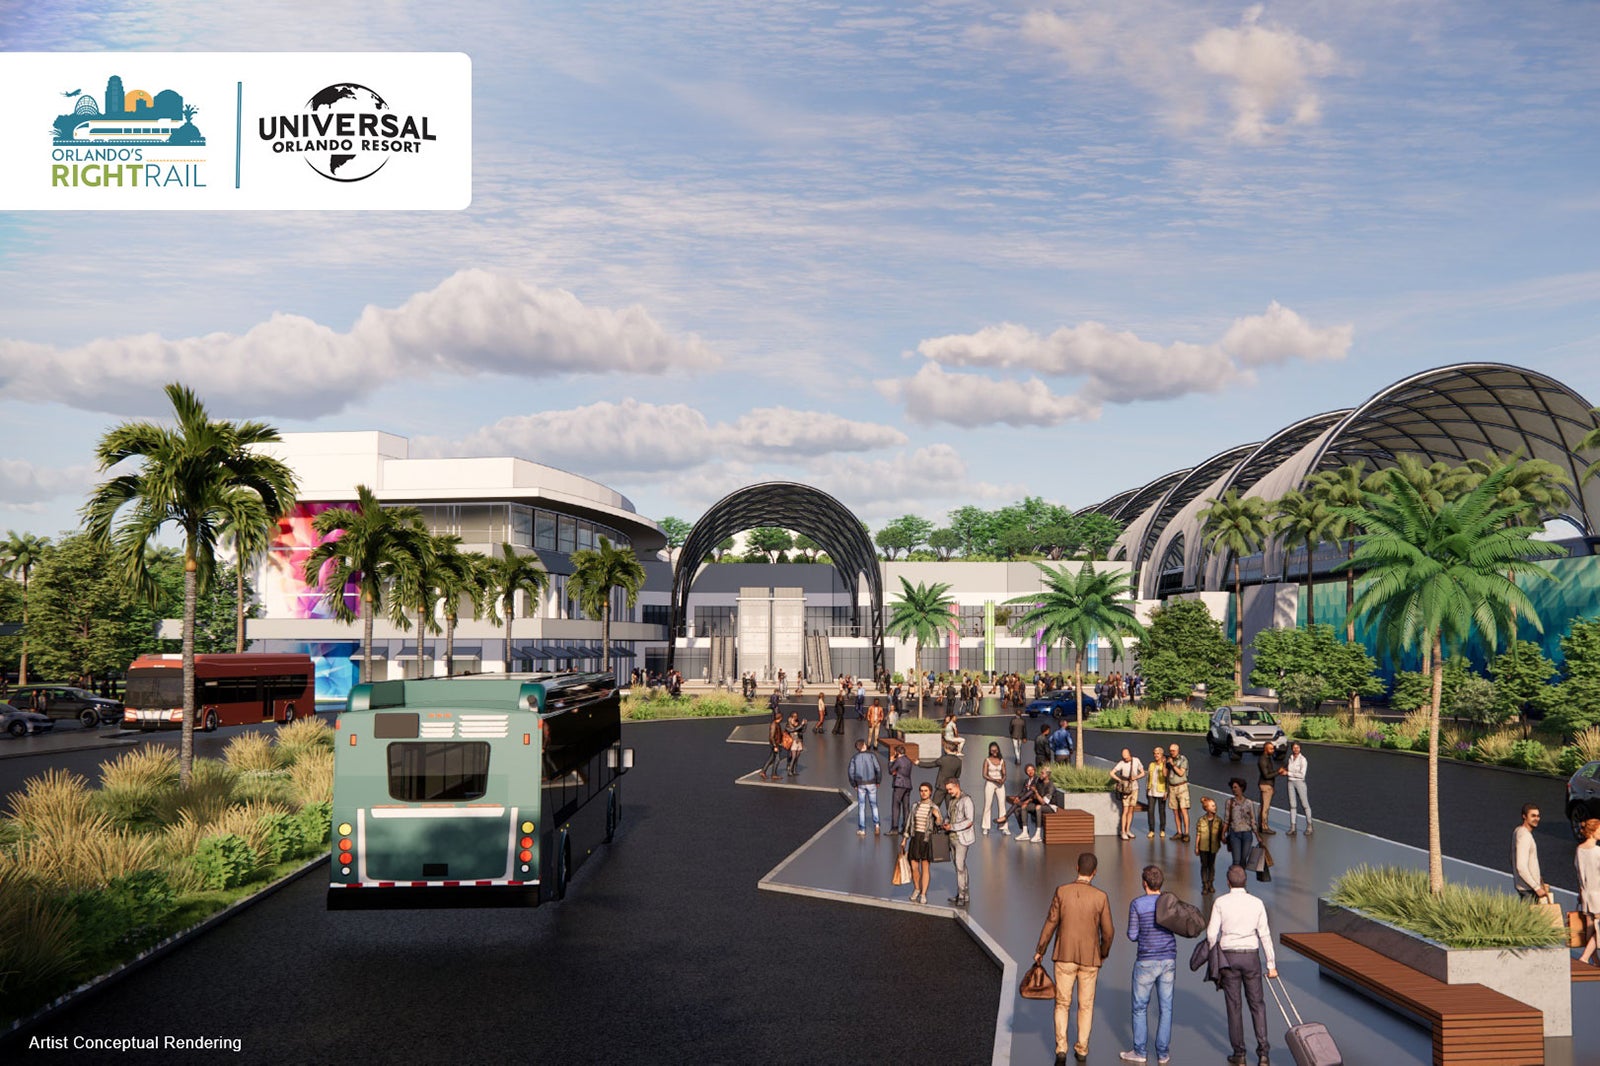 Universal Orlando doubles down on development plans with regional train service investment